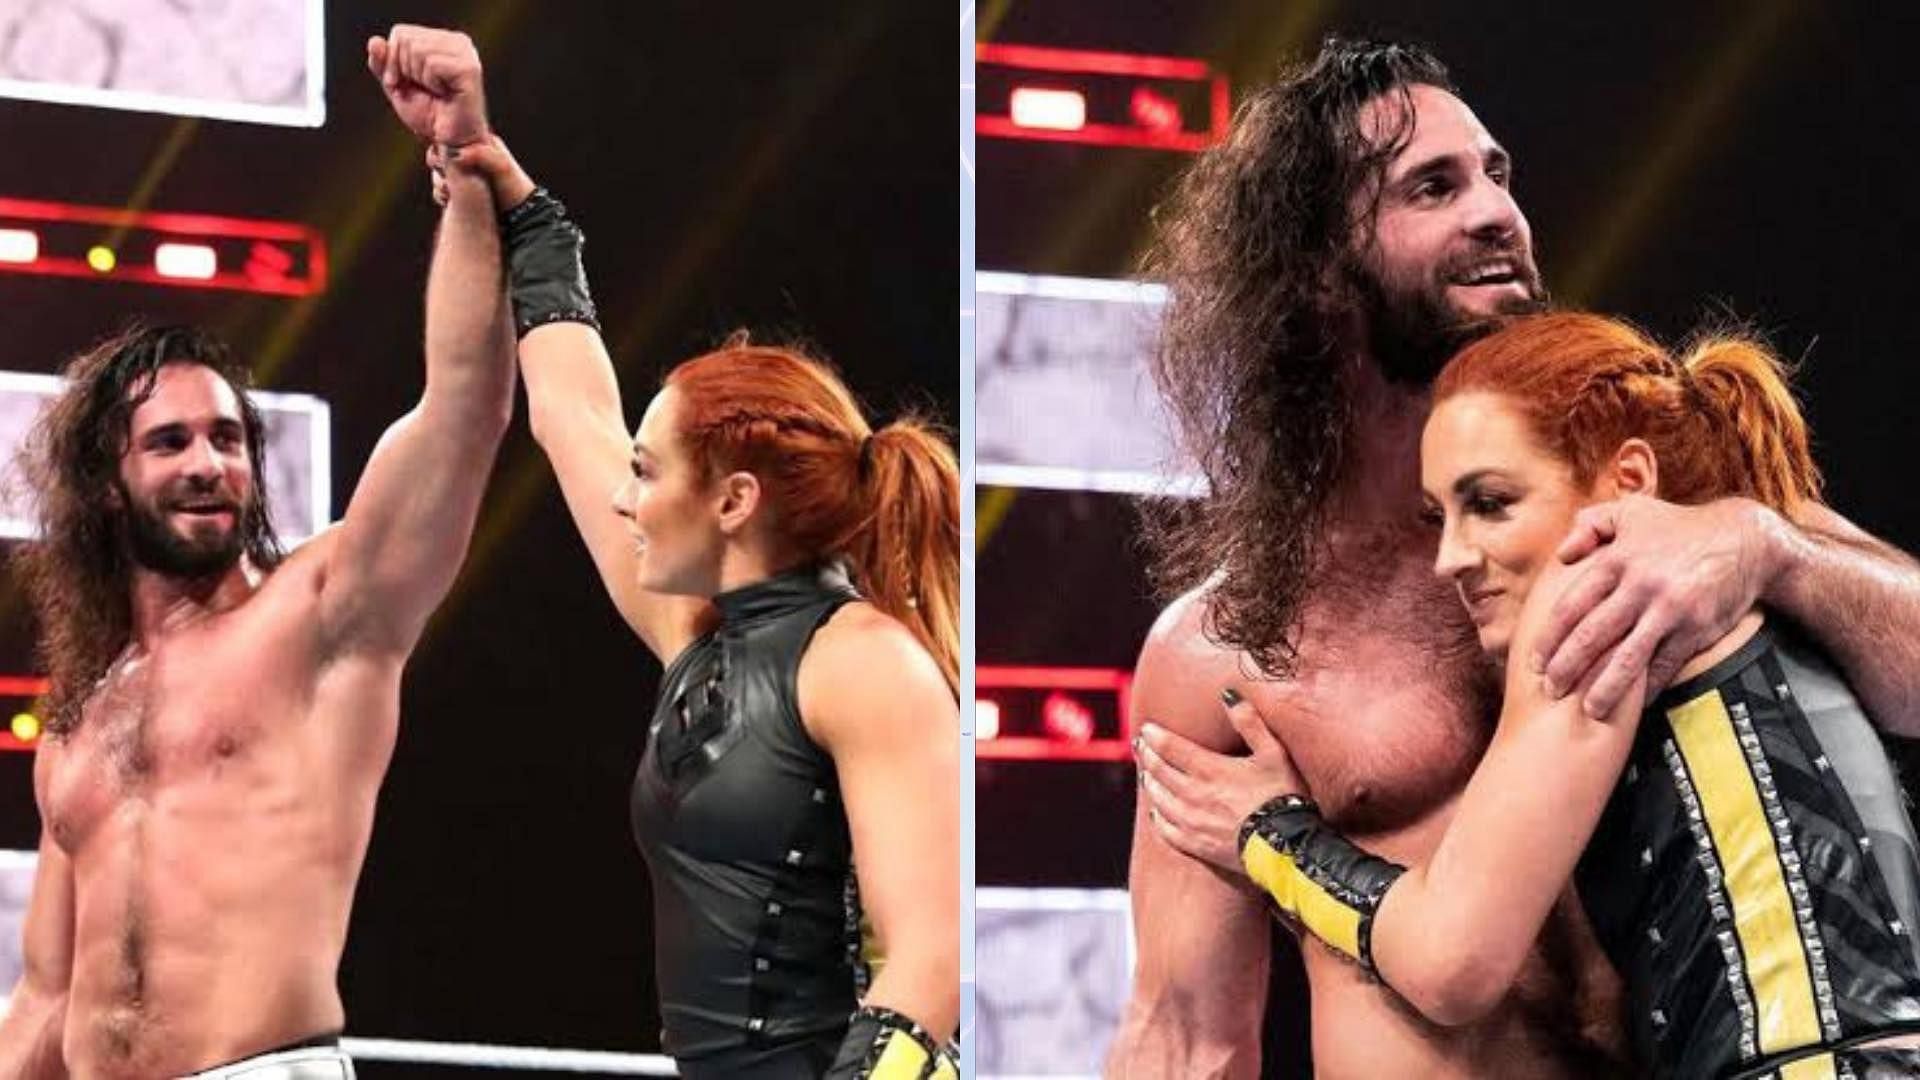 Seth Rollins and Becky Lynch have portrayed their relationship on-screen before